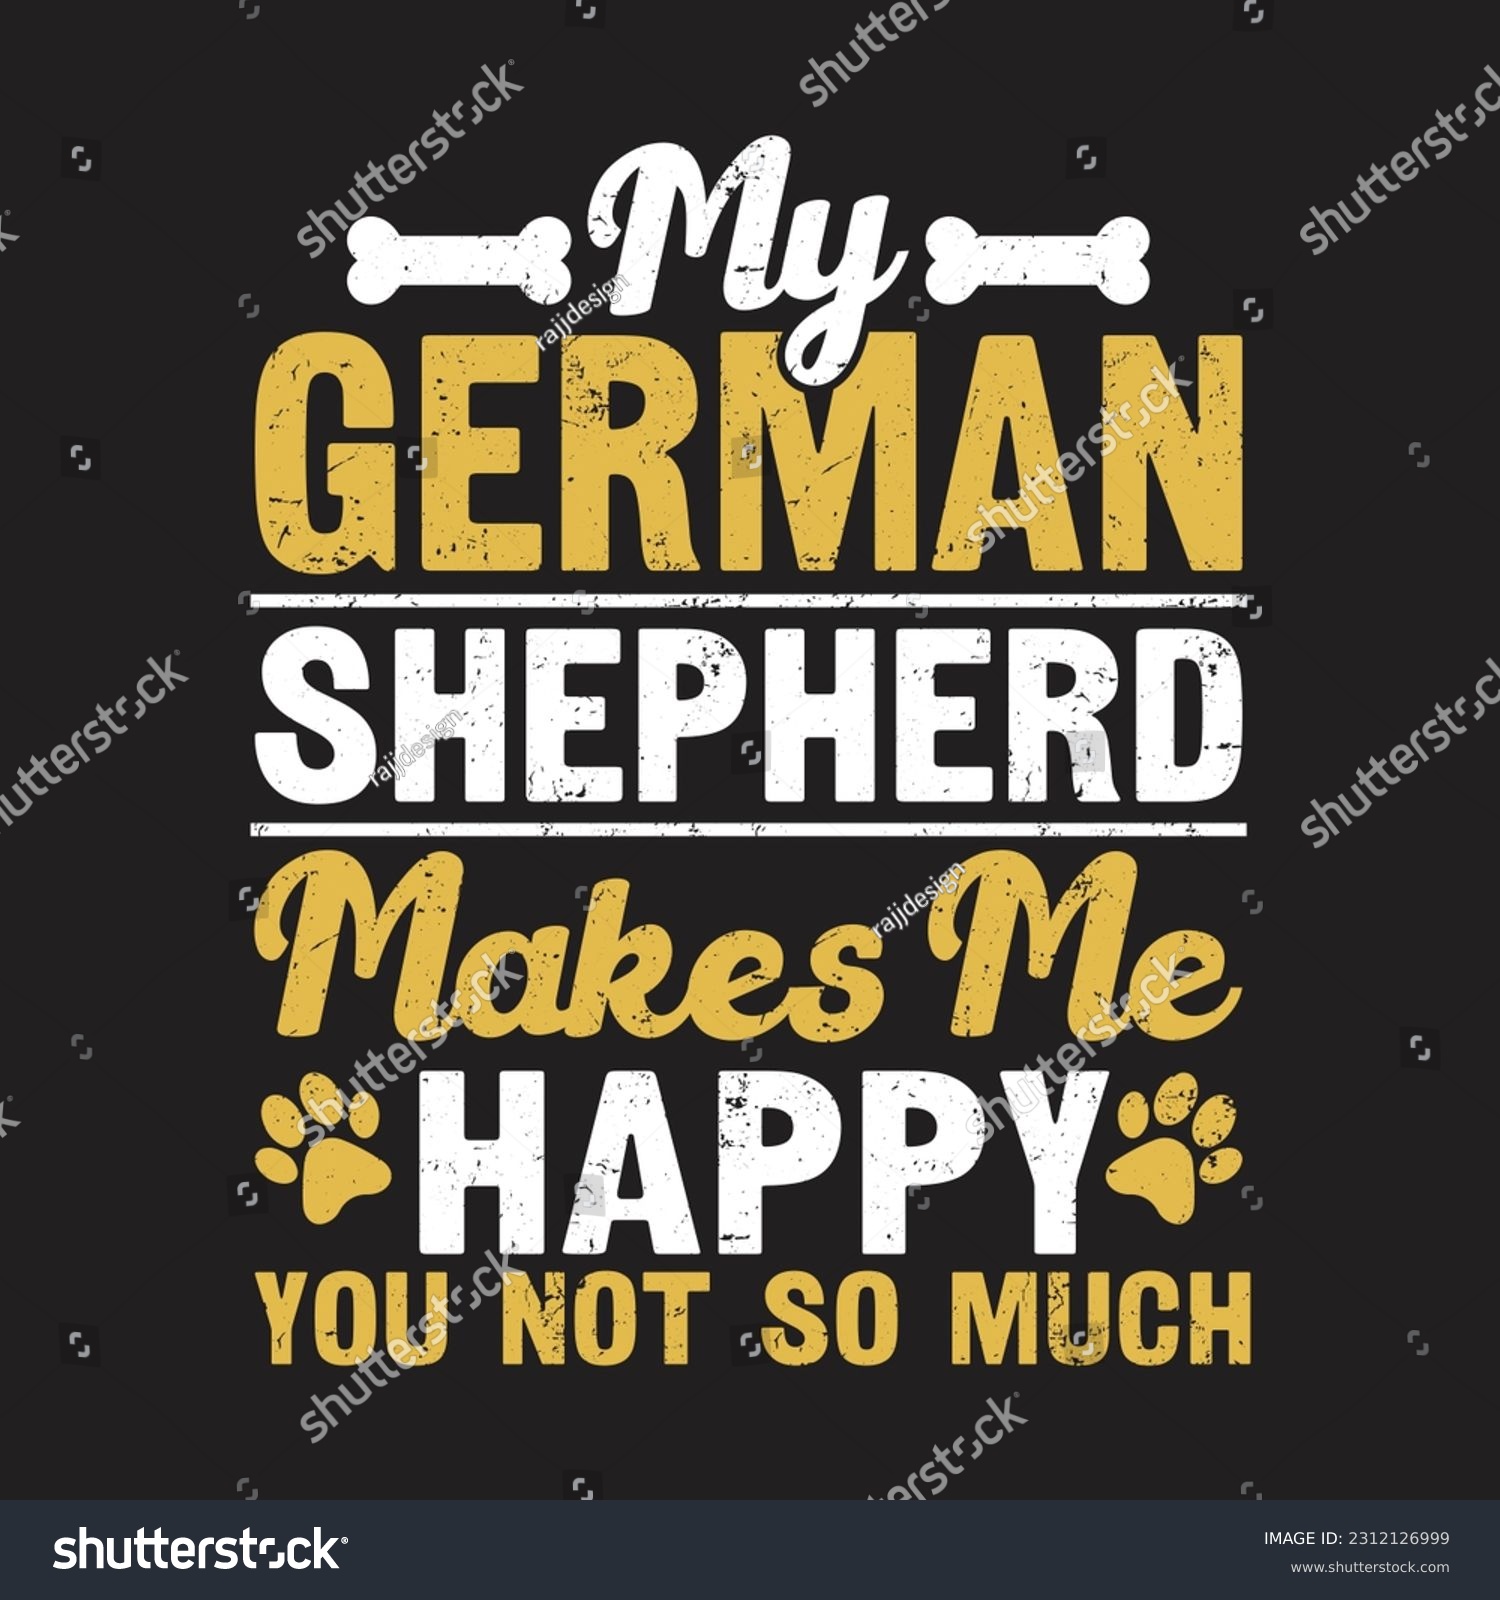 SVG of My German Shepherd Makes Me Happy You Not So Much T-Shirt Design, Posters, Greeting Cards, Textiles, and Sticker Vector Illustration svg